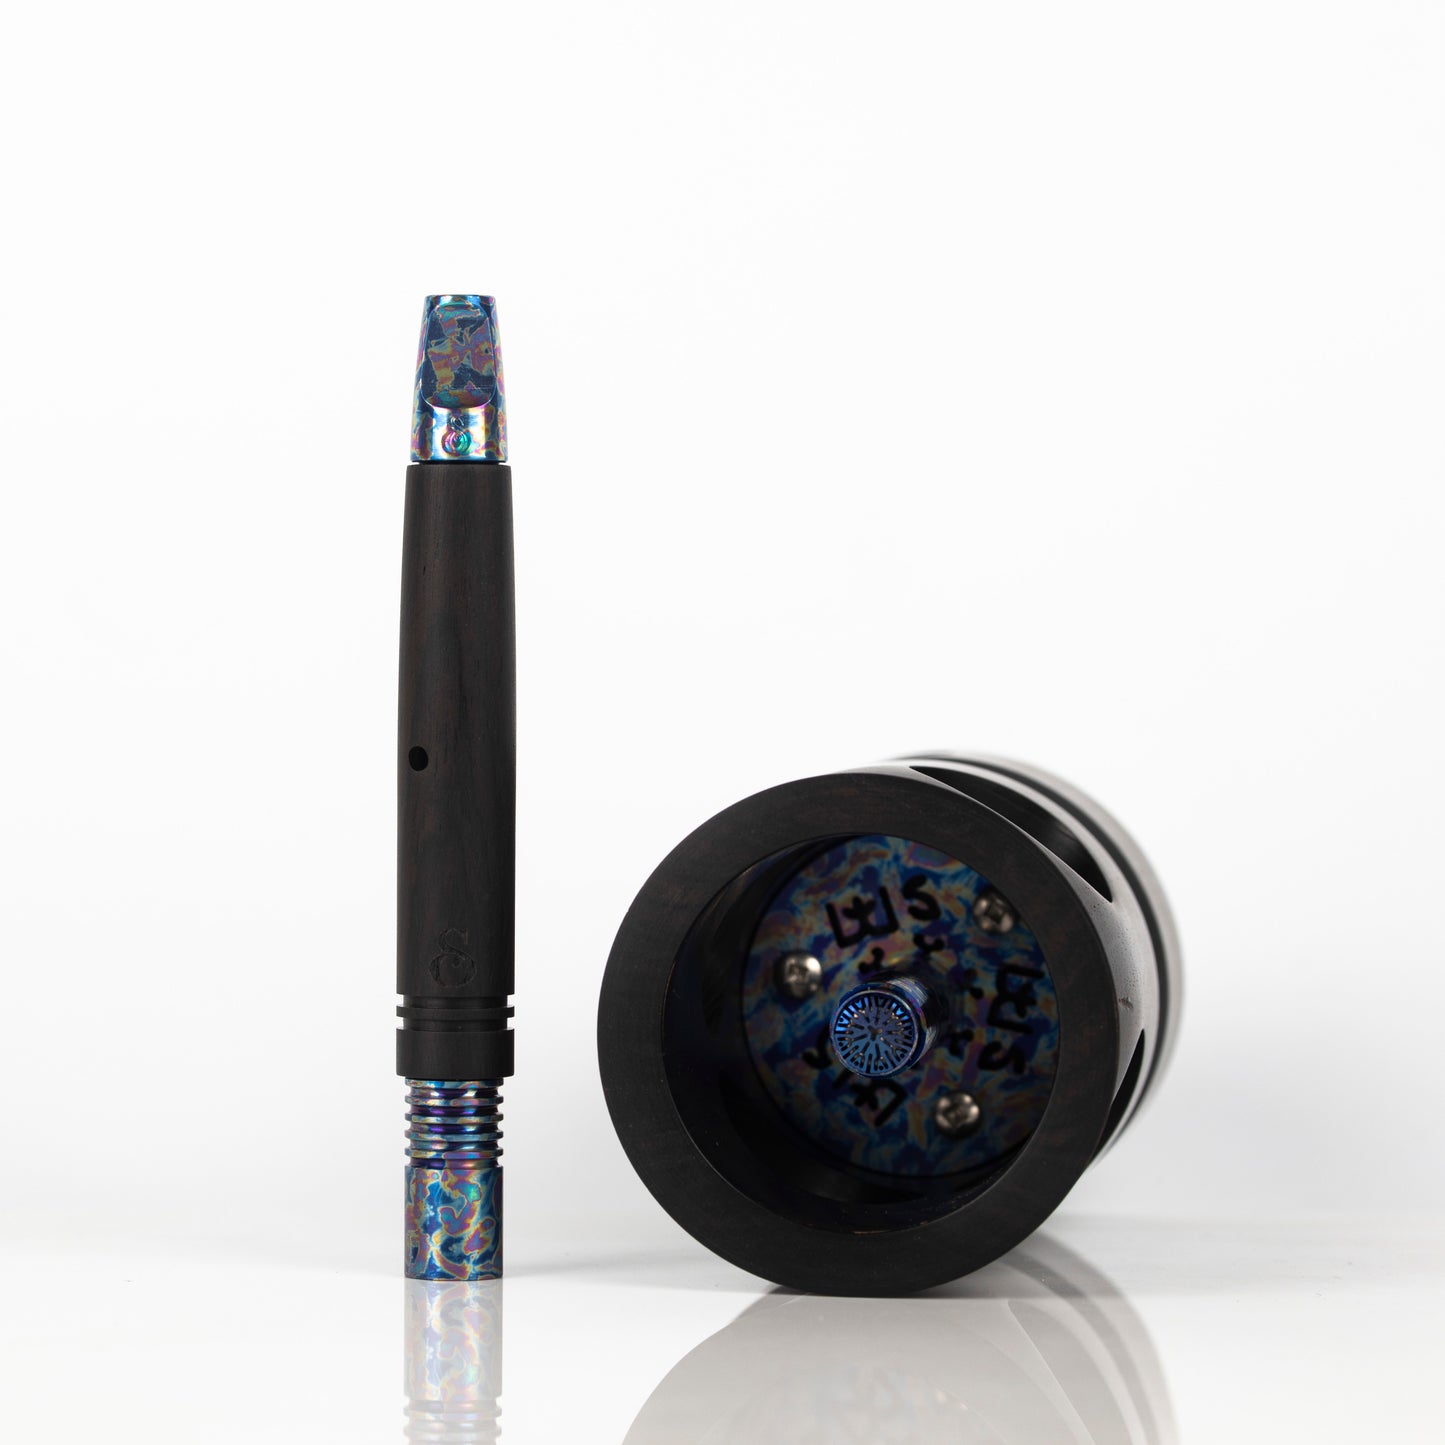 Galactic Camo Eds TnT Blackwood Woodscents Package